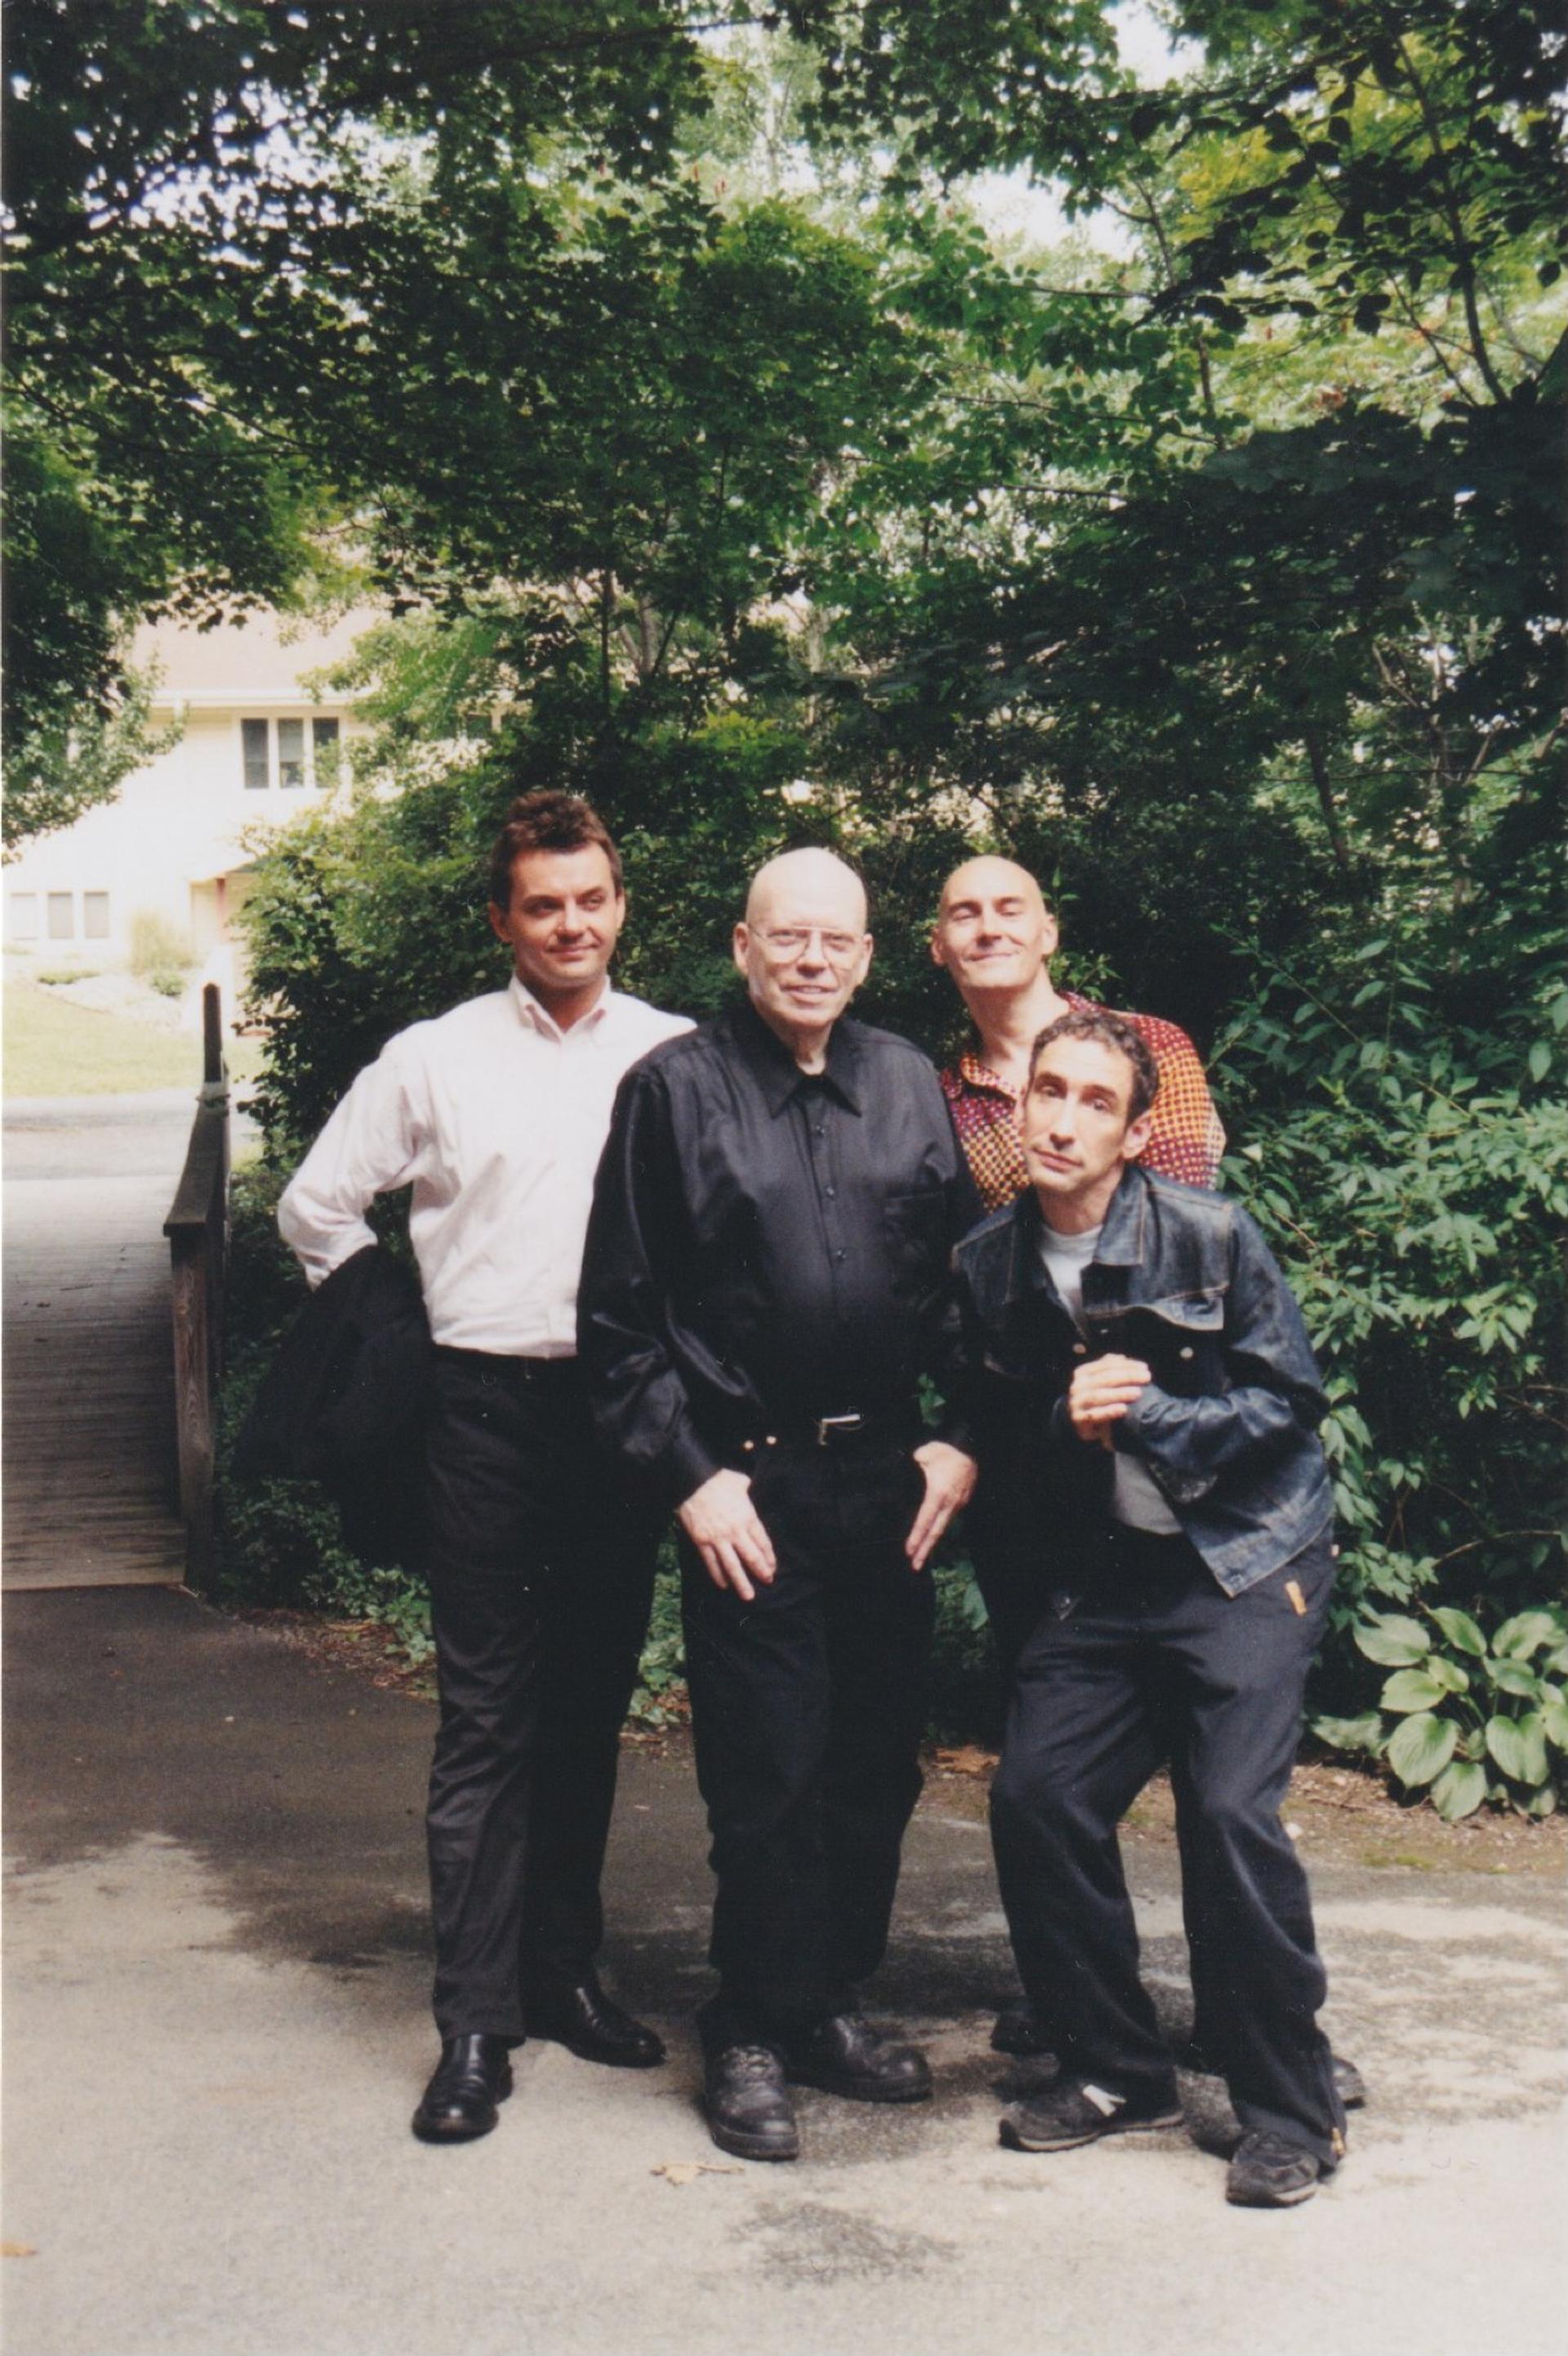 From left: Richard Metzger, Paul Laffoley, Grant Morrison, and Douglas Rushkoff at the Disinfo Omega Retreat in 2004. Photo: William Alderwick